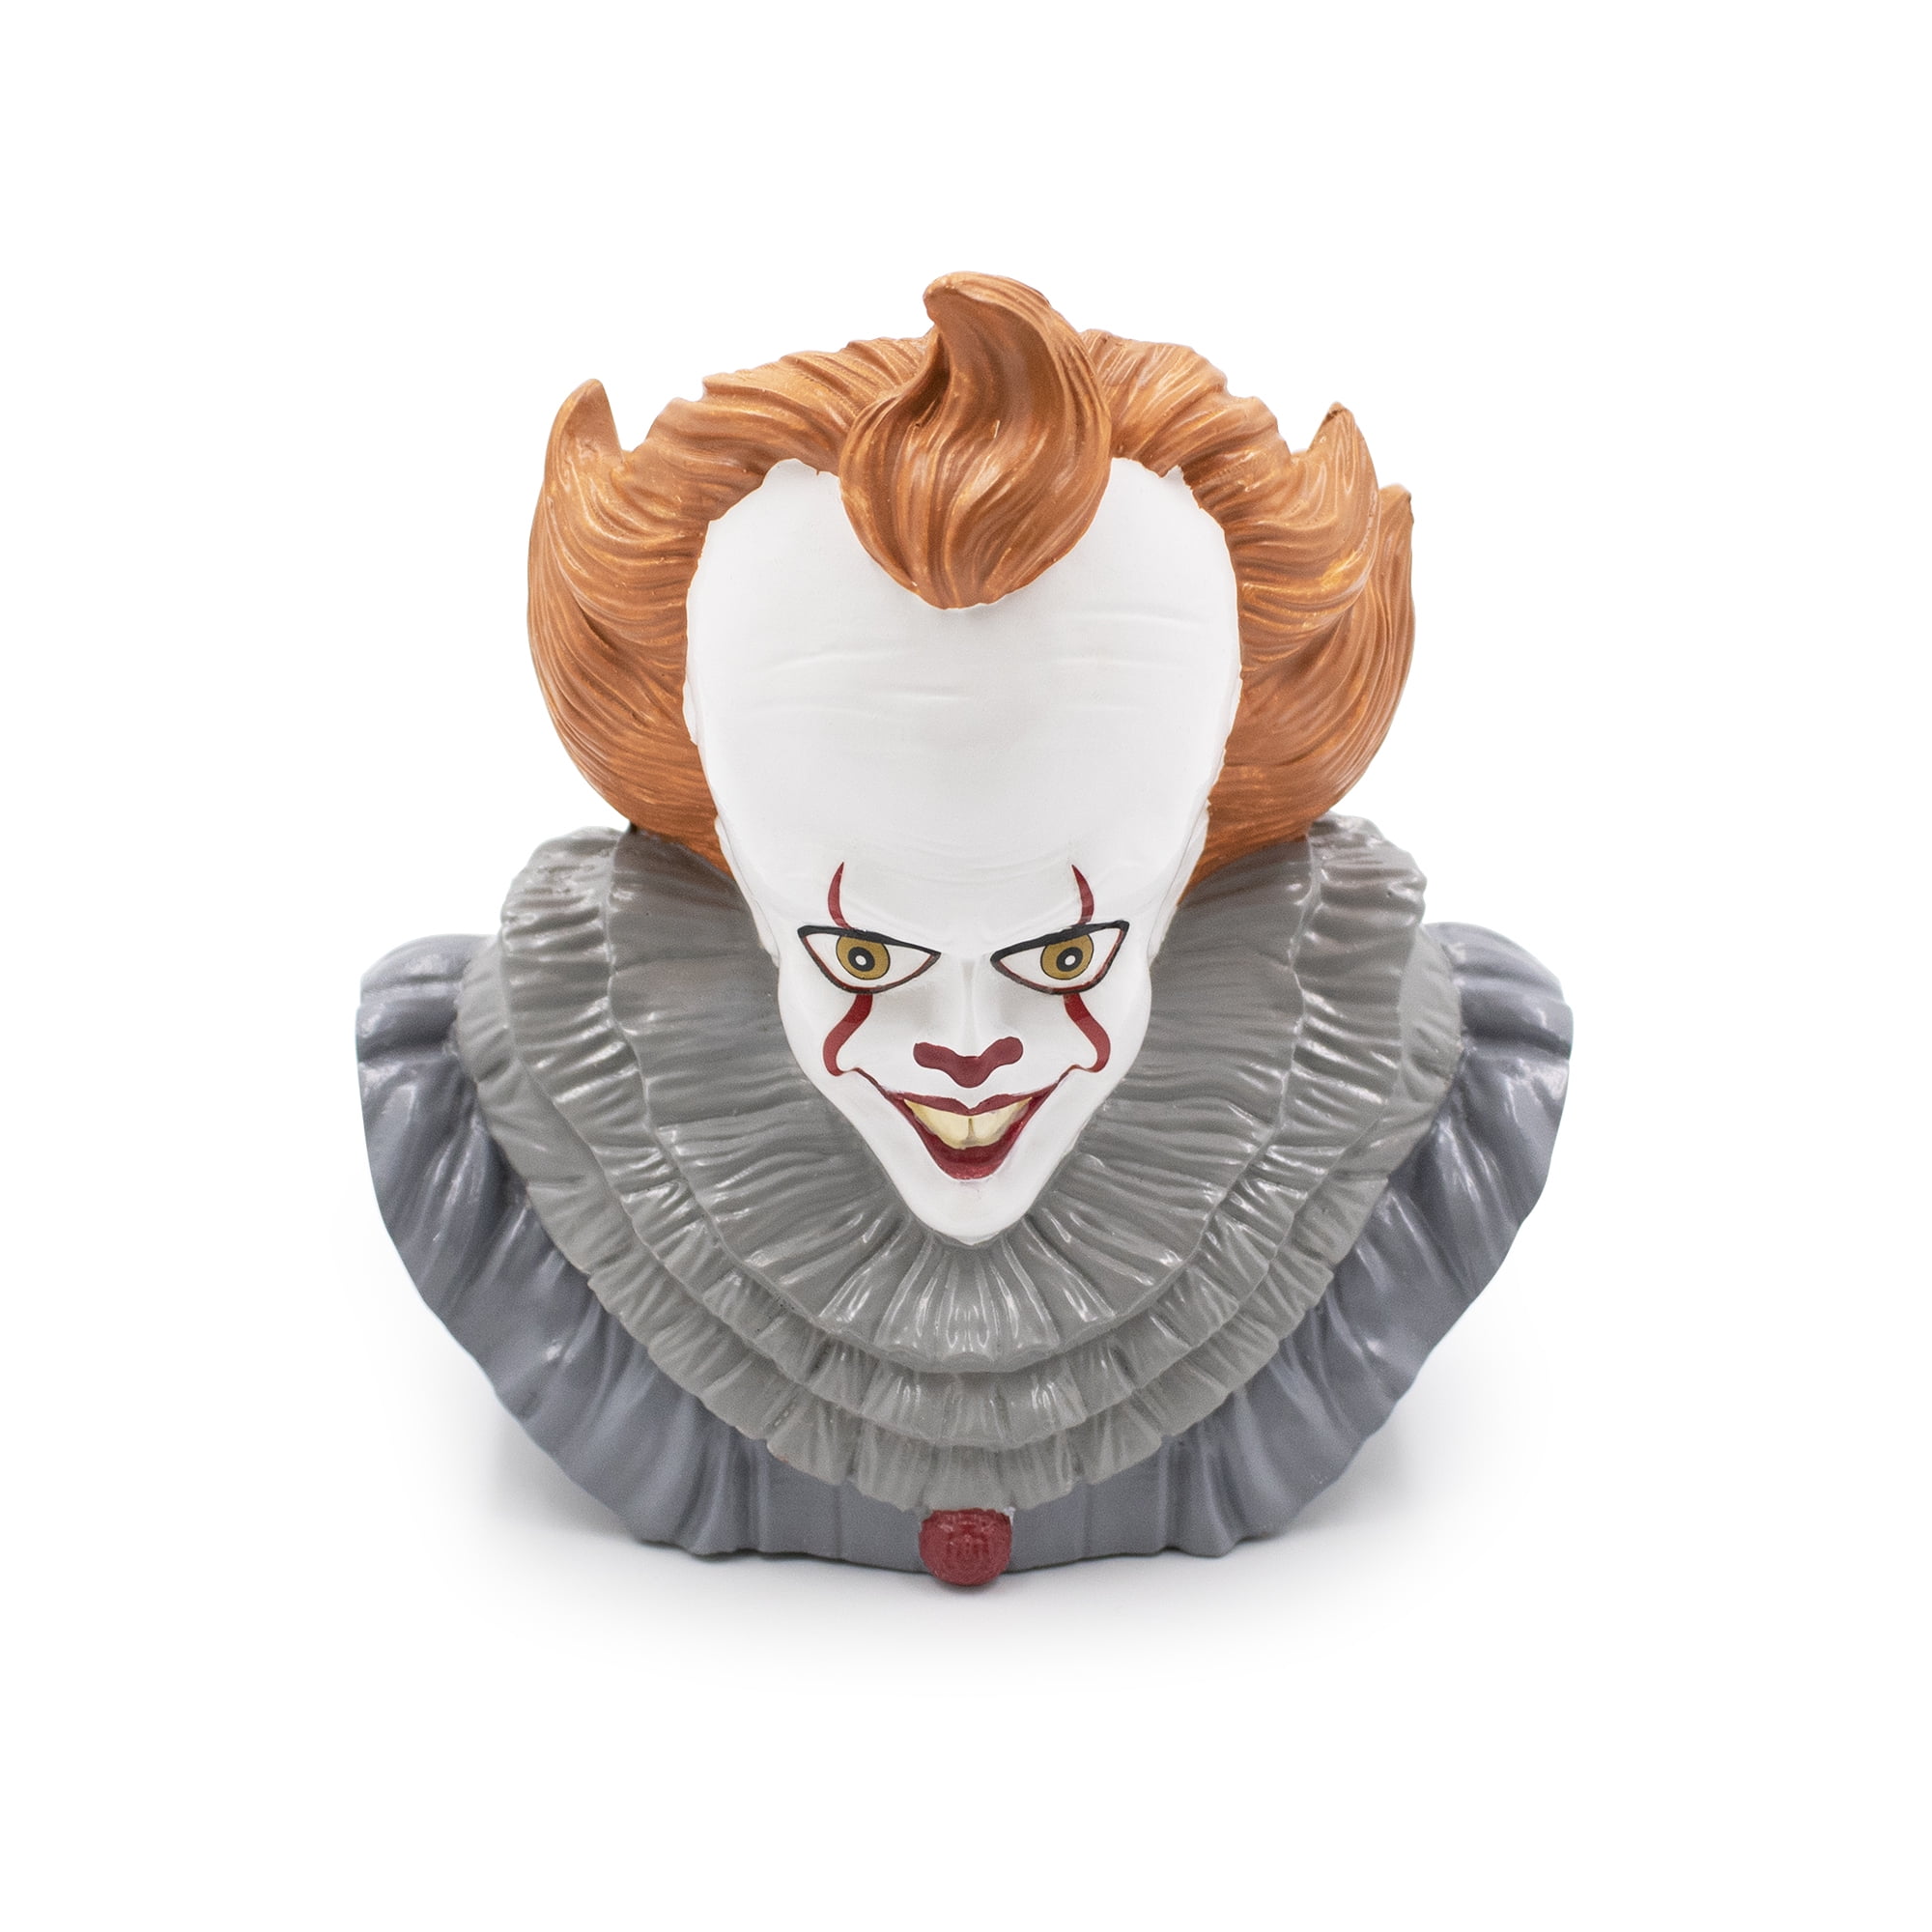 Culturefly It Collectible Box Walmartcom - videos matching making pennywise a roblox account it